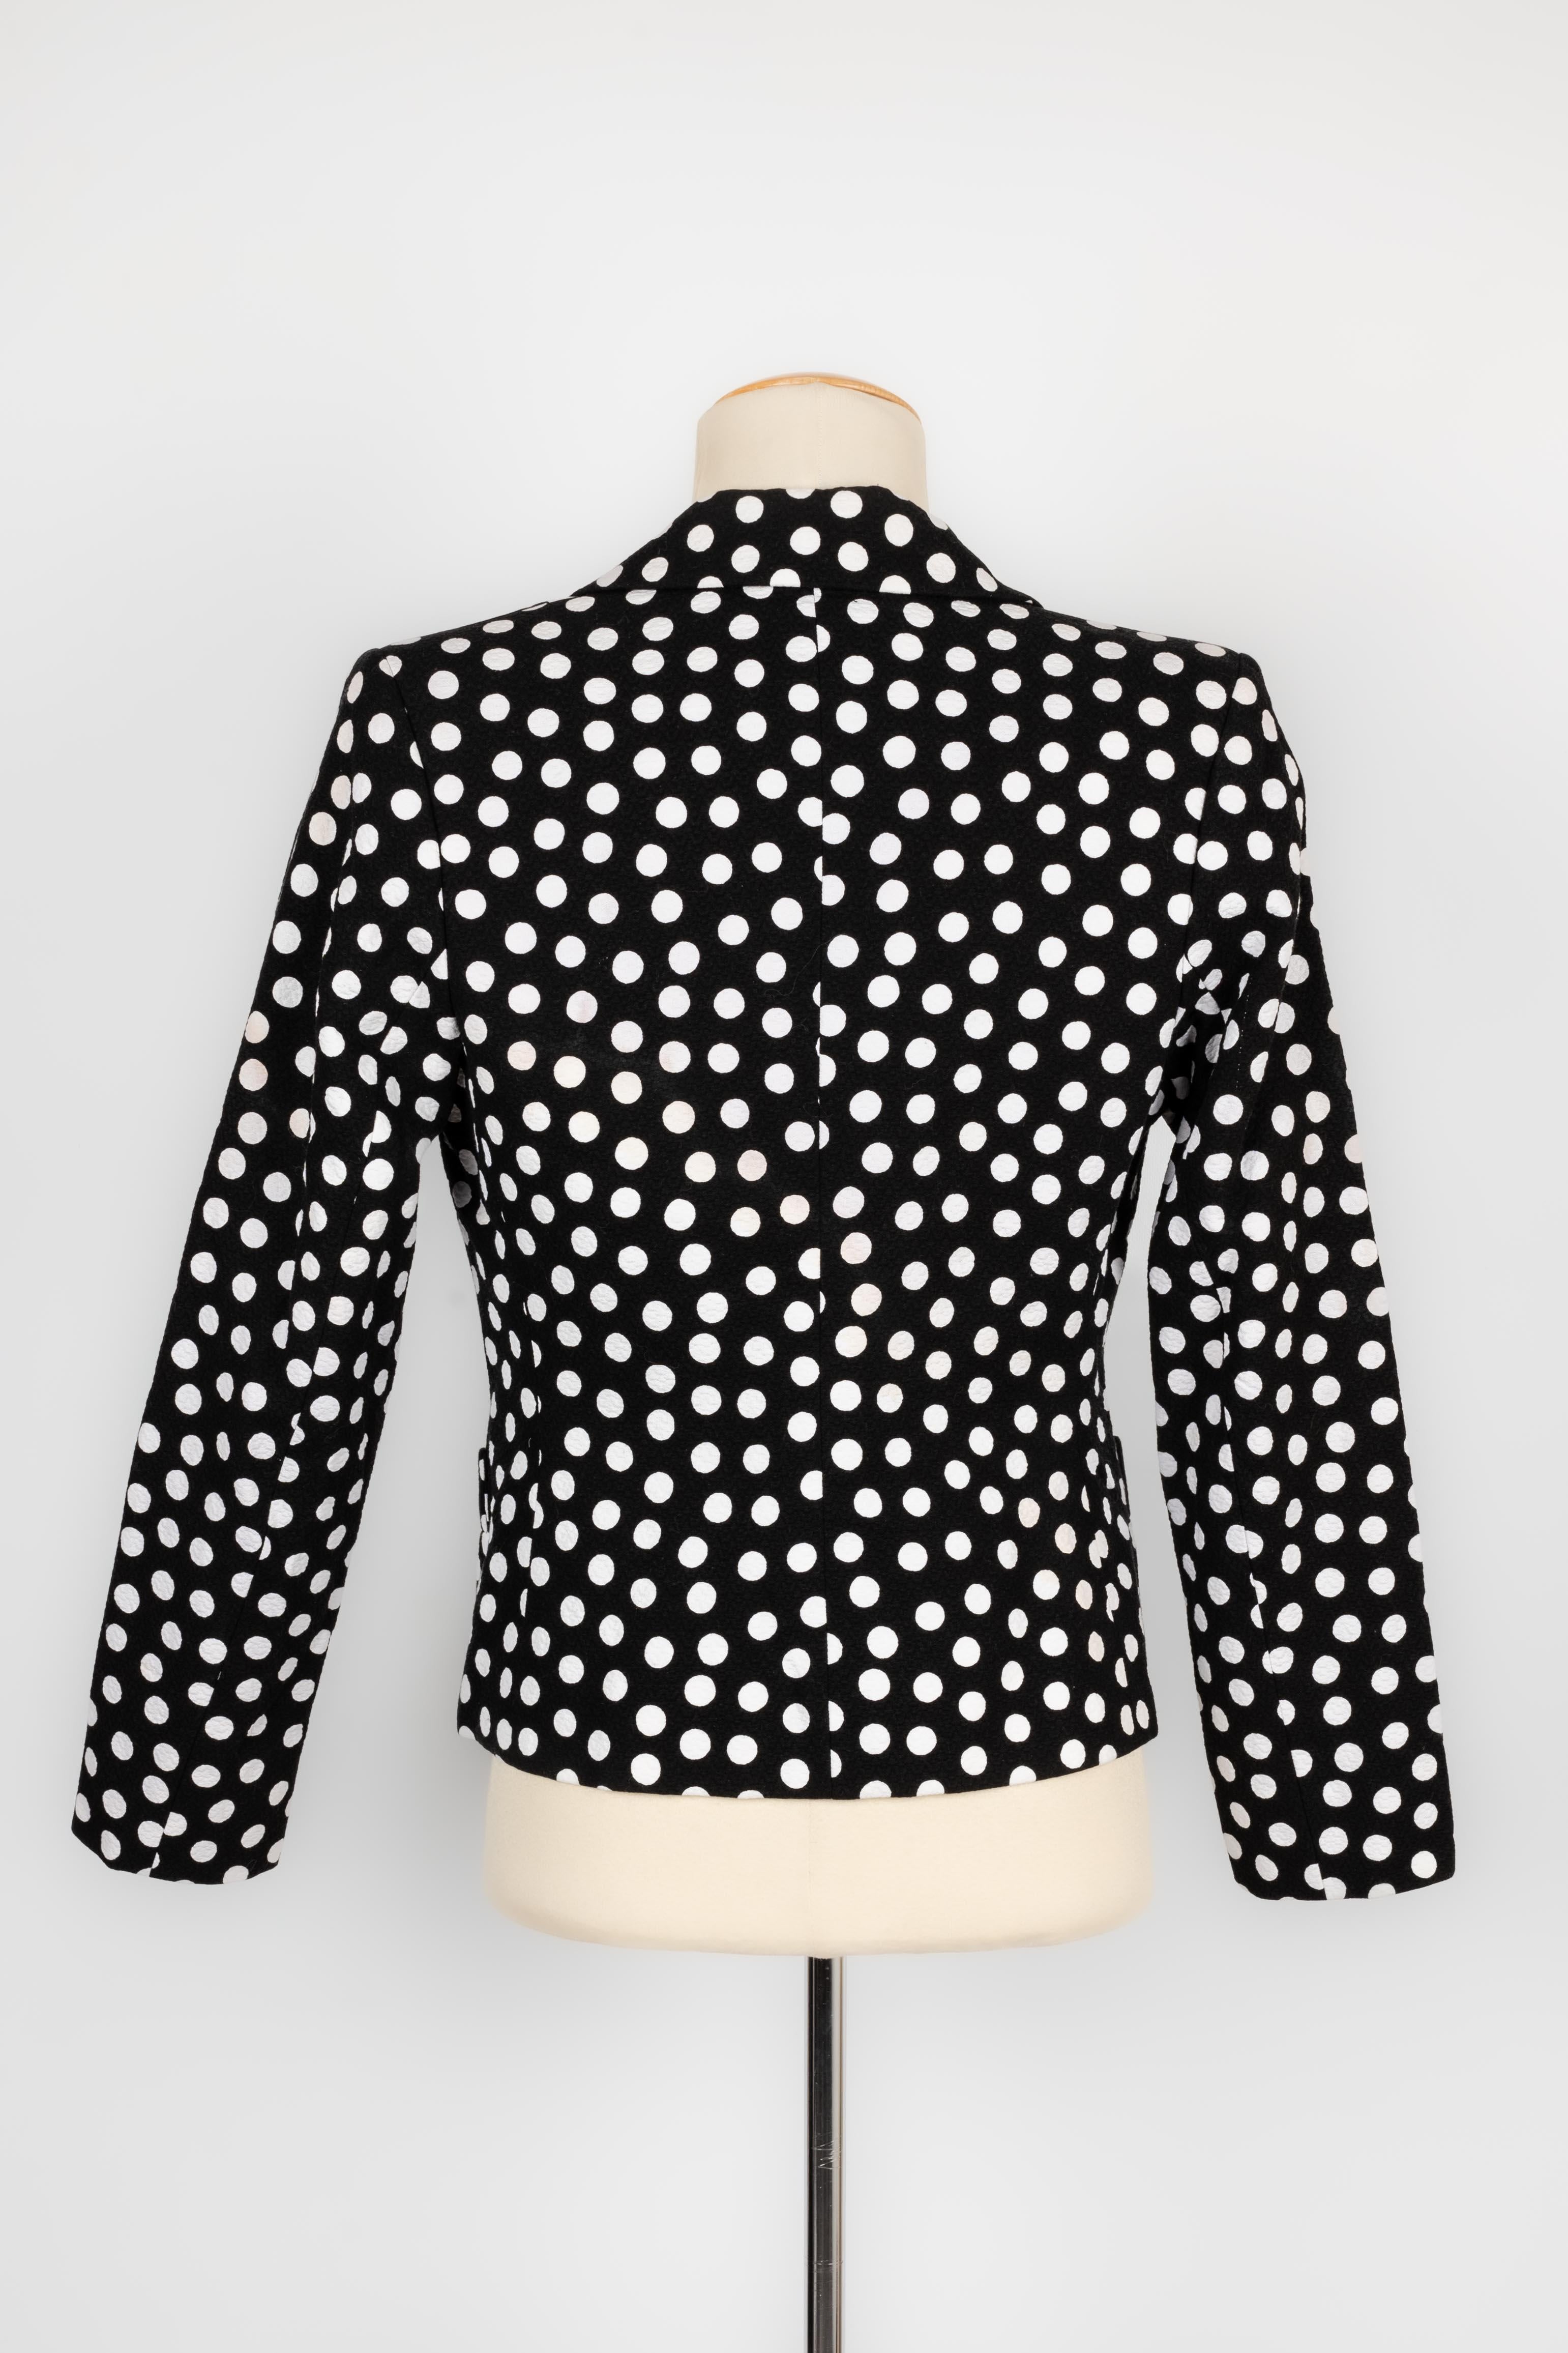 YVES SAINT LAURENT - (Made in France) Black and white jacket in cotton. Size 38FR.

Condition:
Very good condition

Dimensions:
Shoulder width: 41 cm - Sleeve length: 54 cm - Length: 57 cm

FV150


With her expertise in vintage fashion, Isabelle